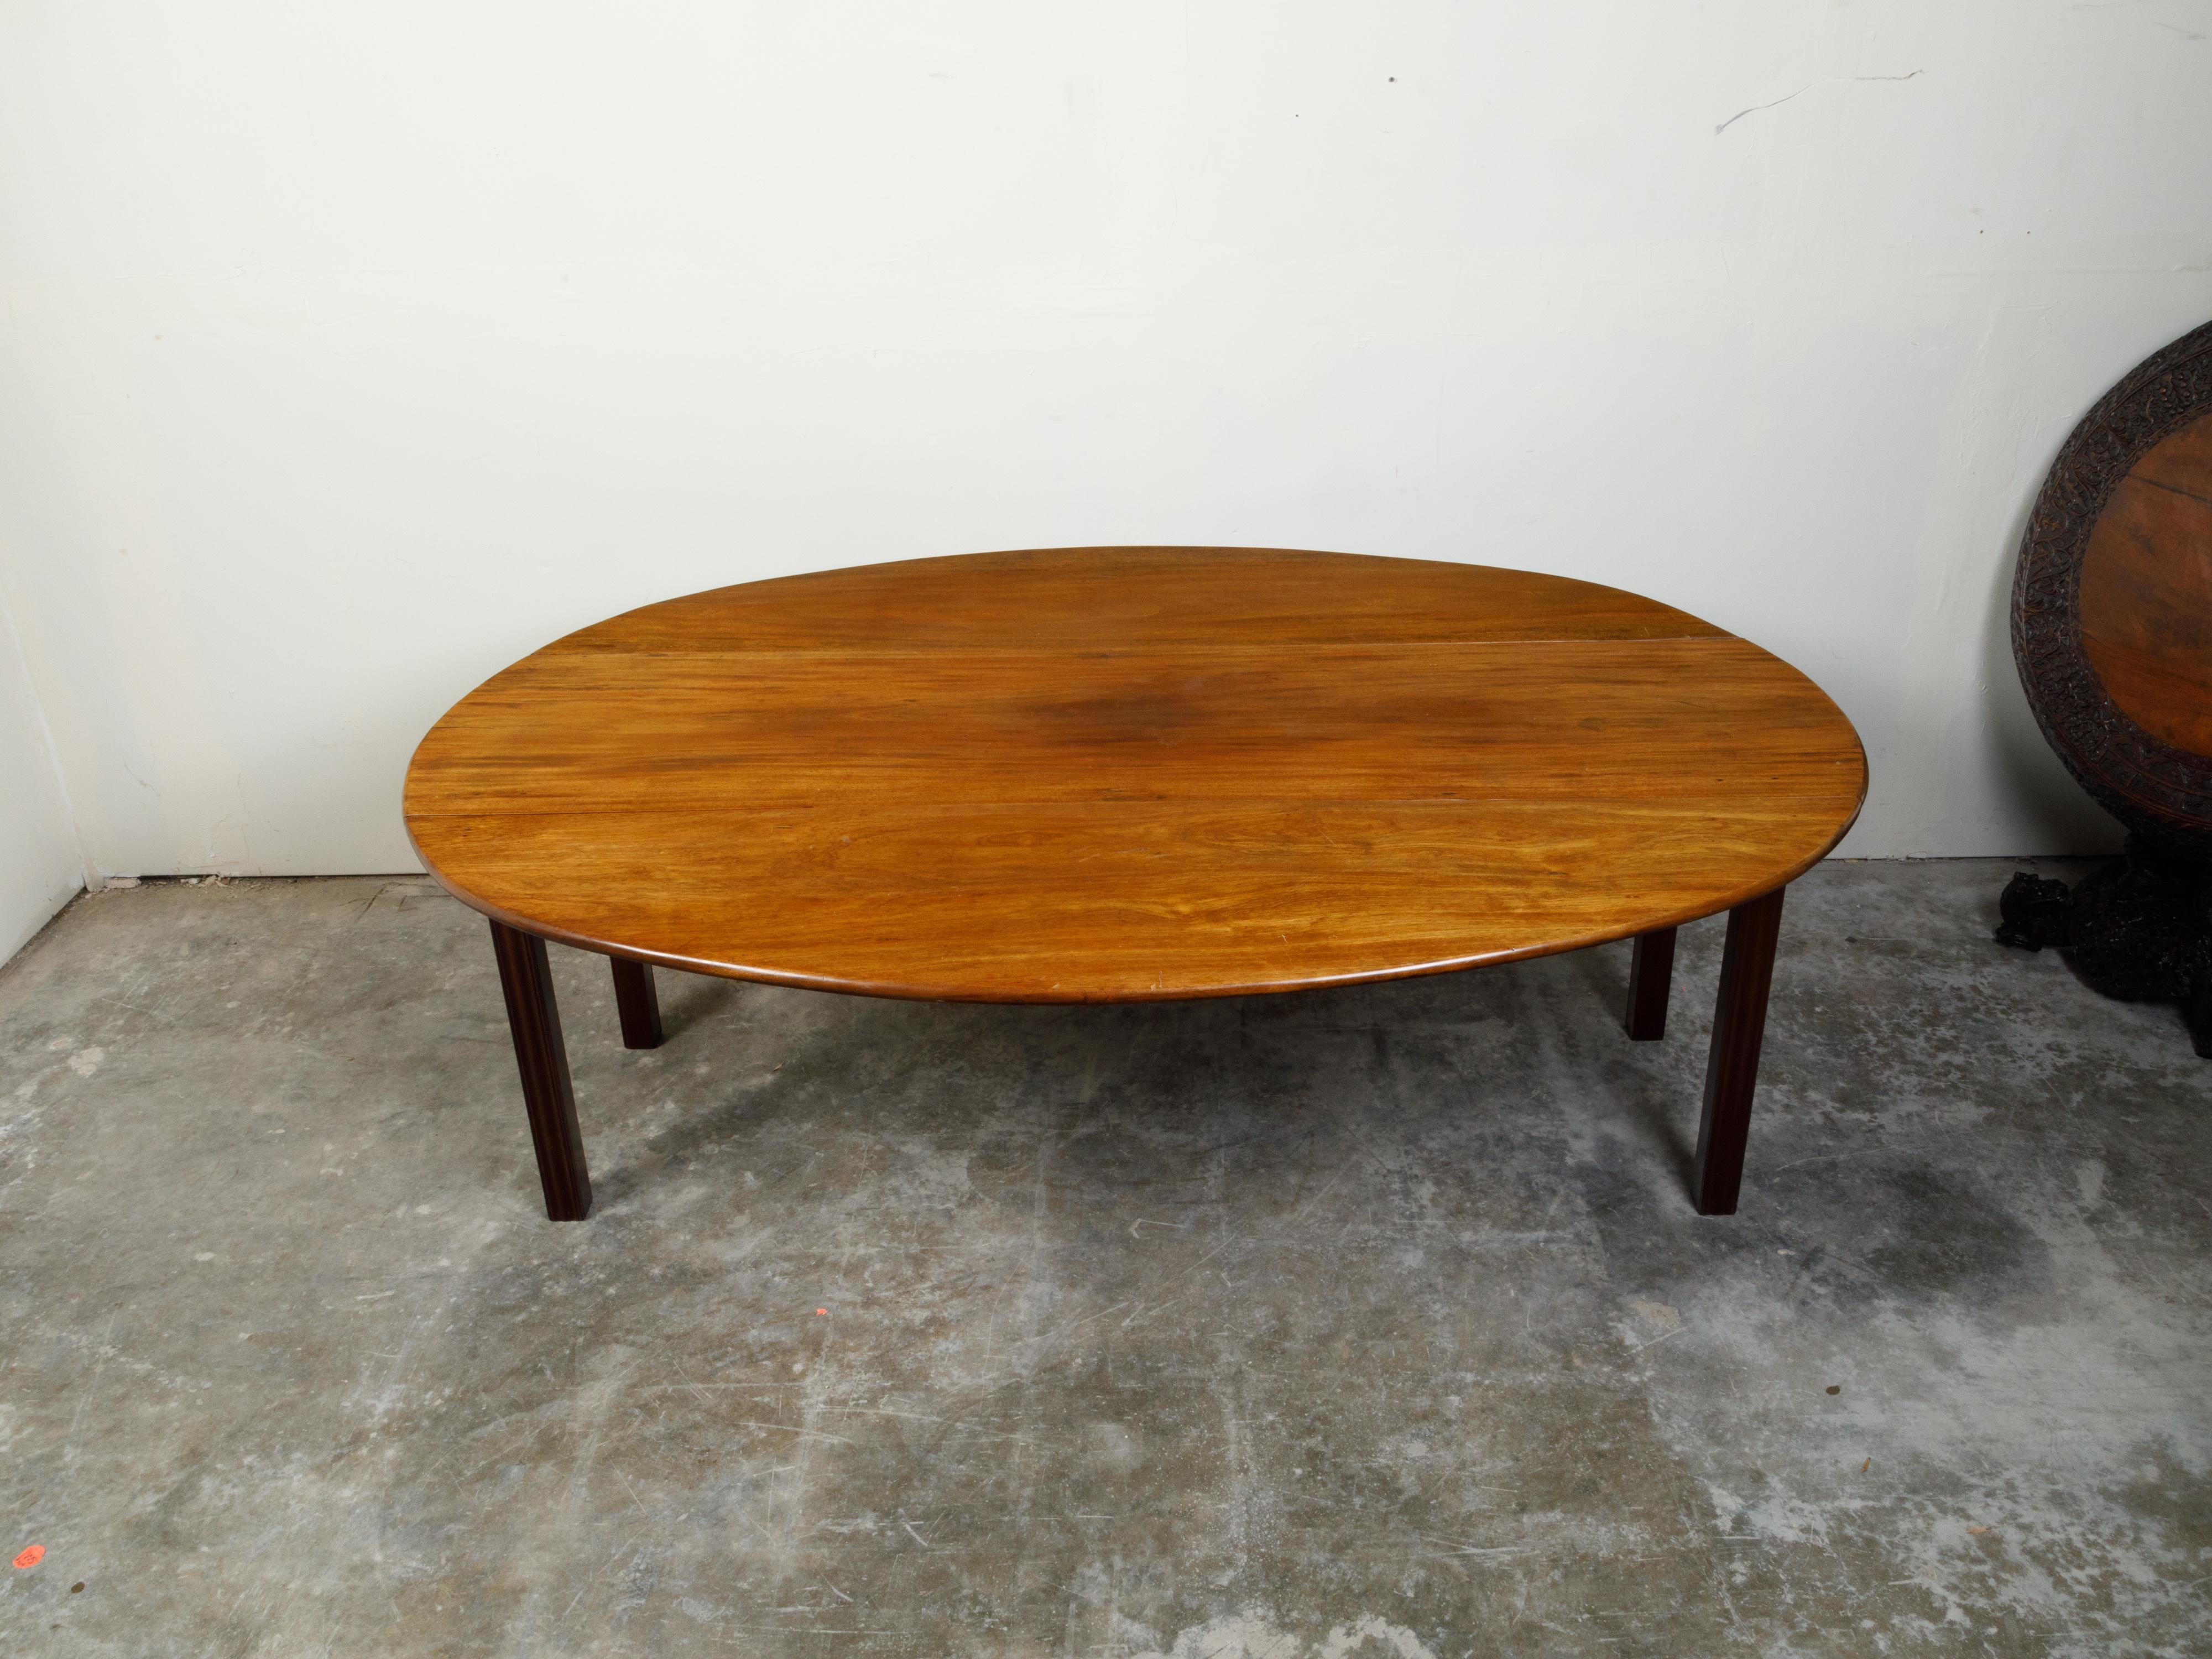 An English walnut drop leaf table from the 19th century, with oval top and straight legs. Created in England during the 19th century, this walnut table features an oval top flanked with two drop leaves, sitting above four straight legs. With its